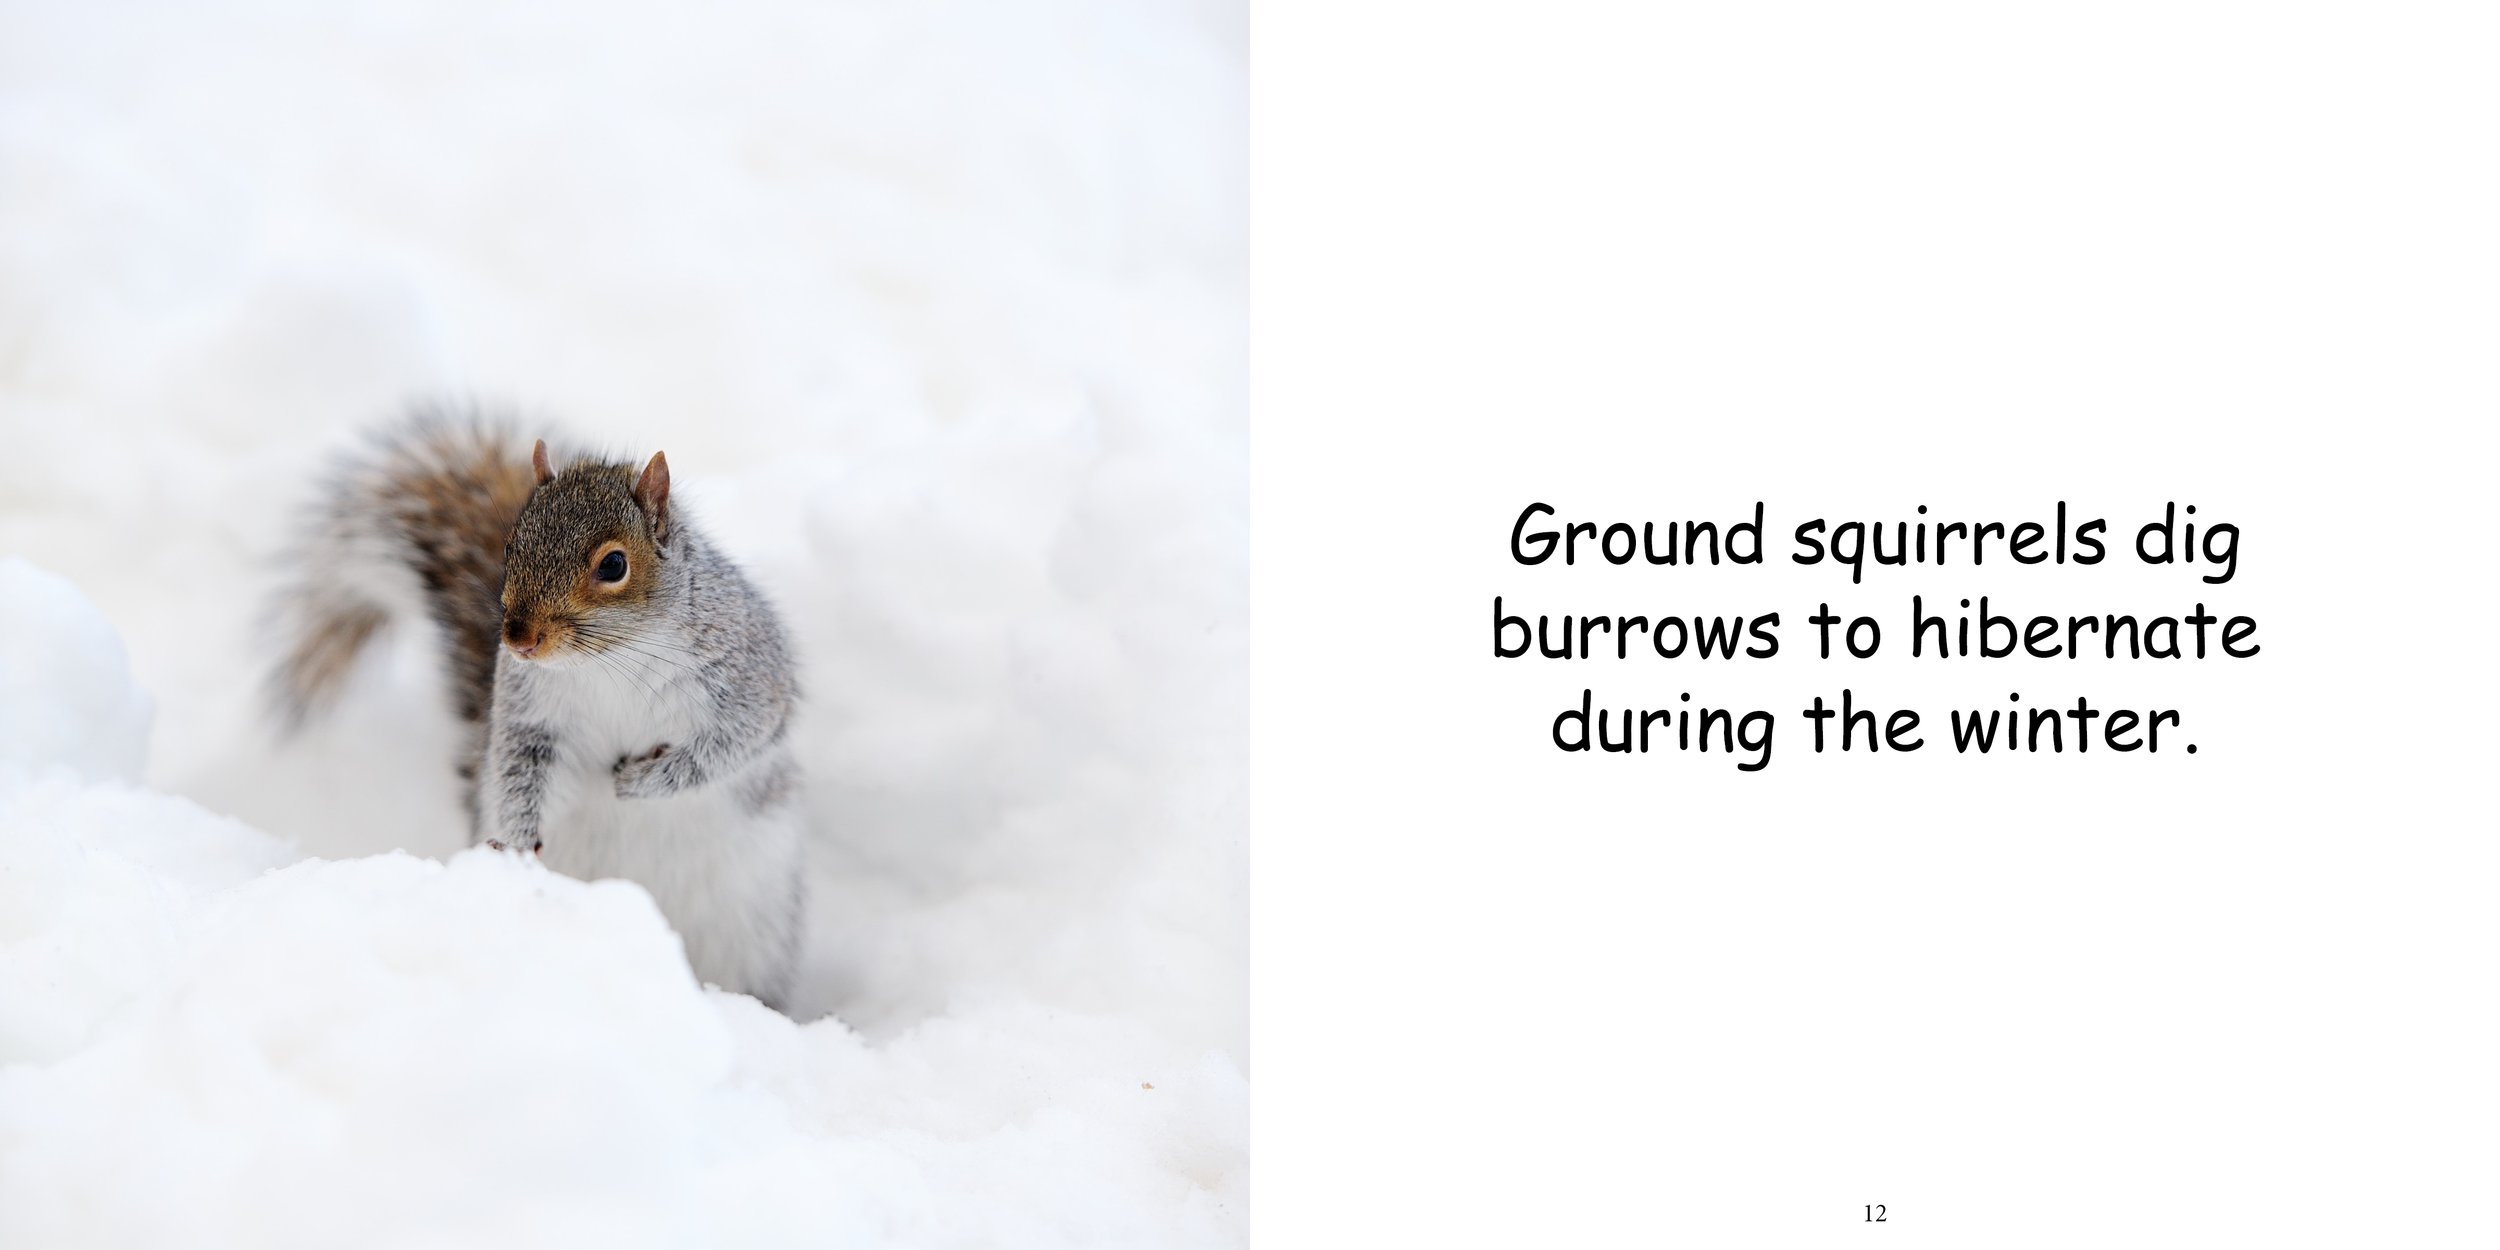 Everything about Squirrels10.jpg